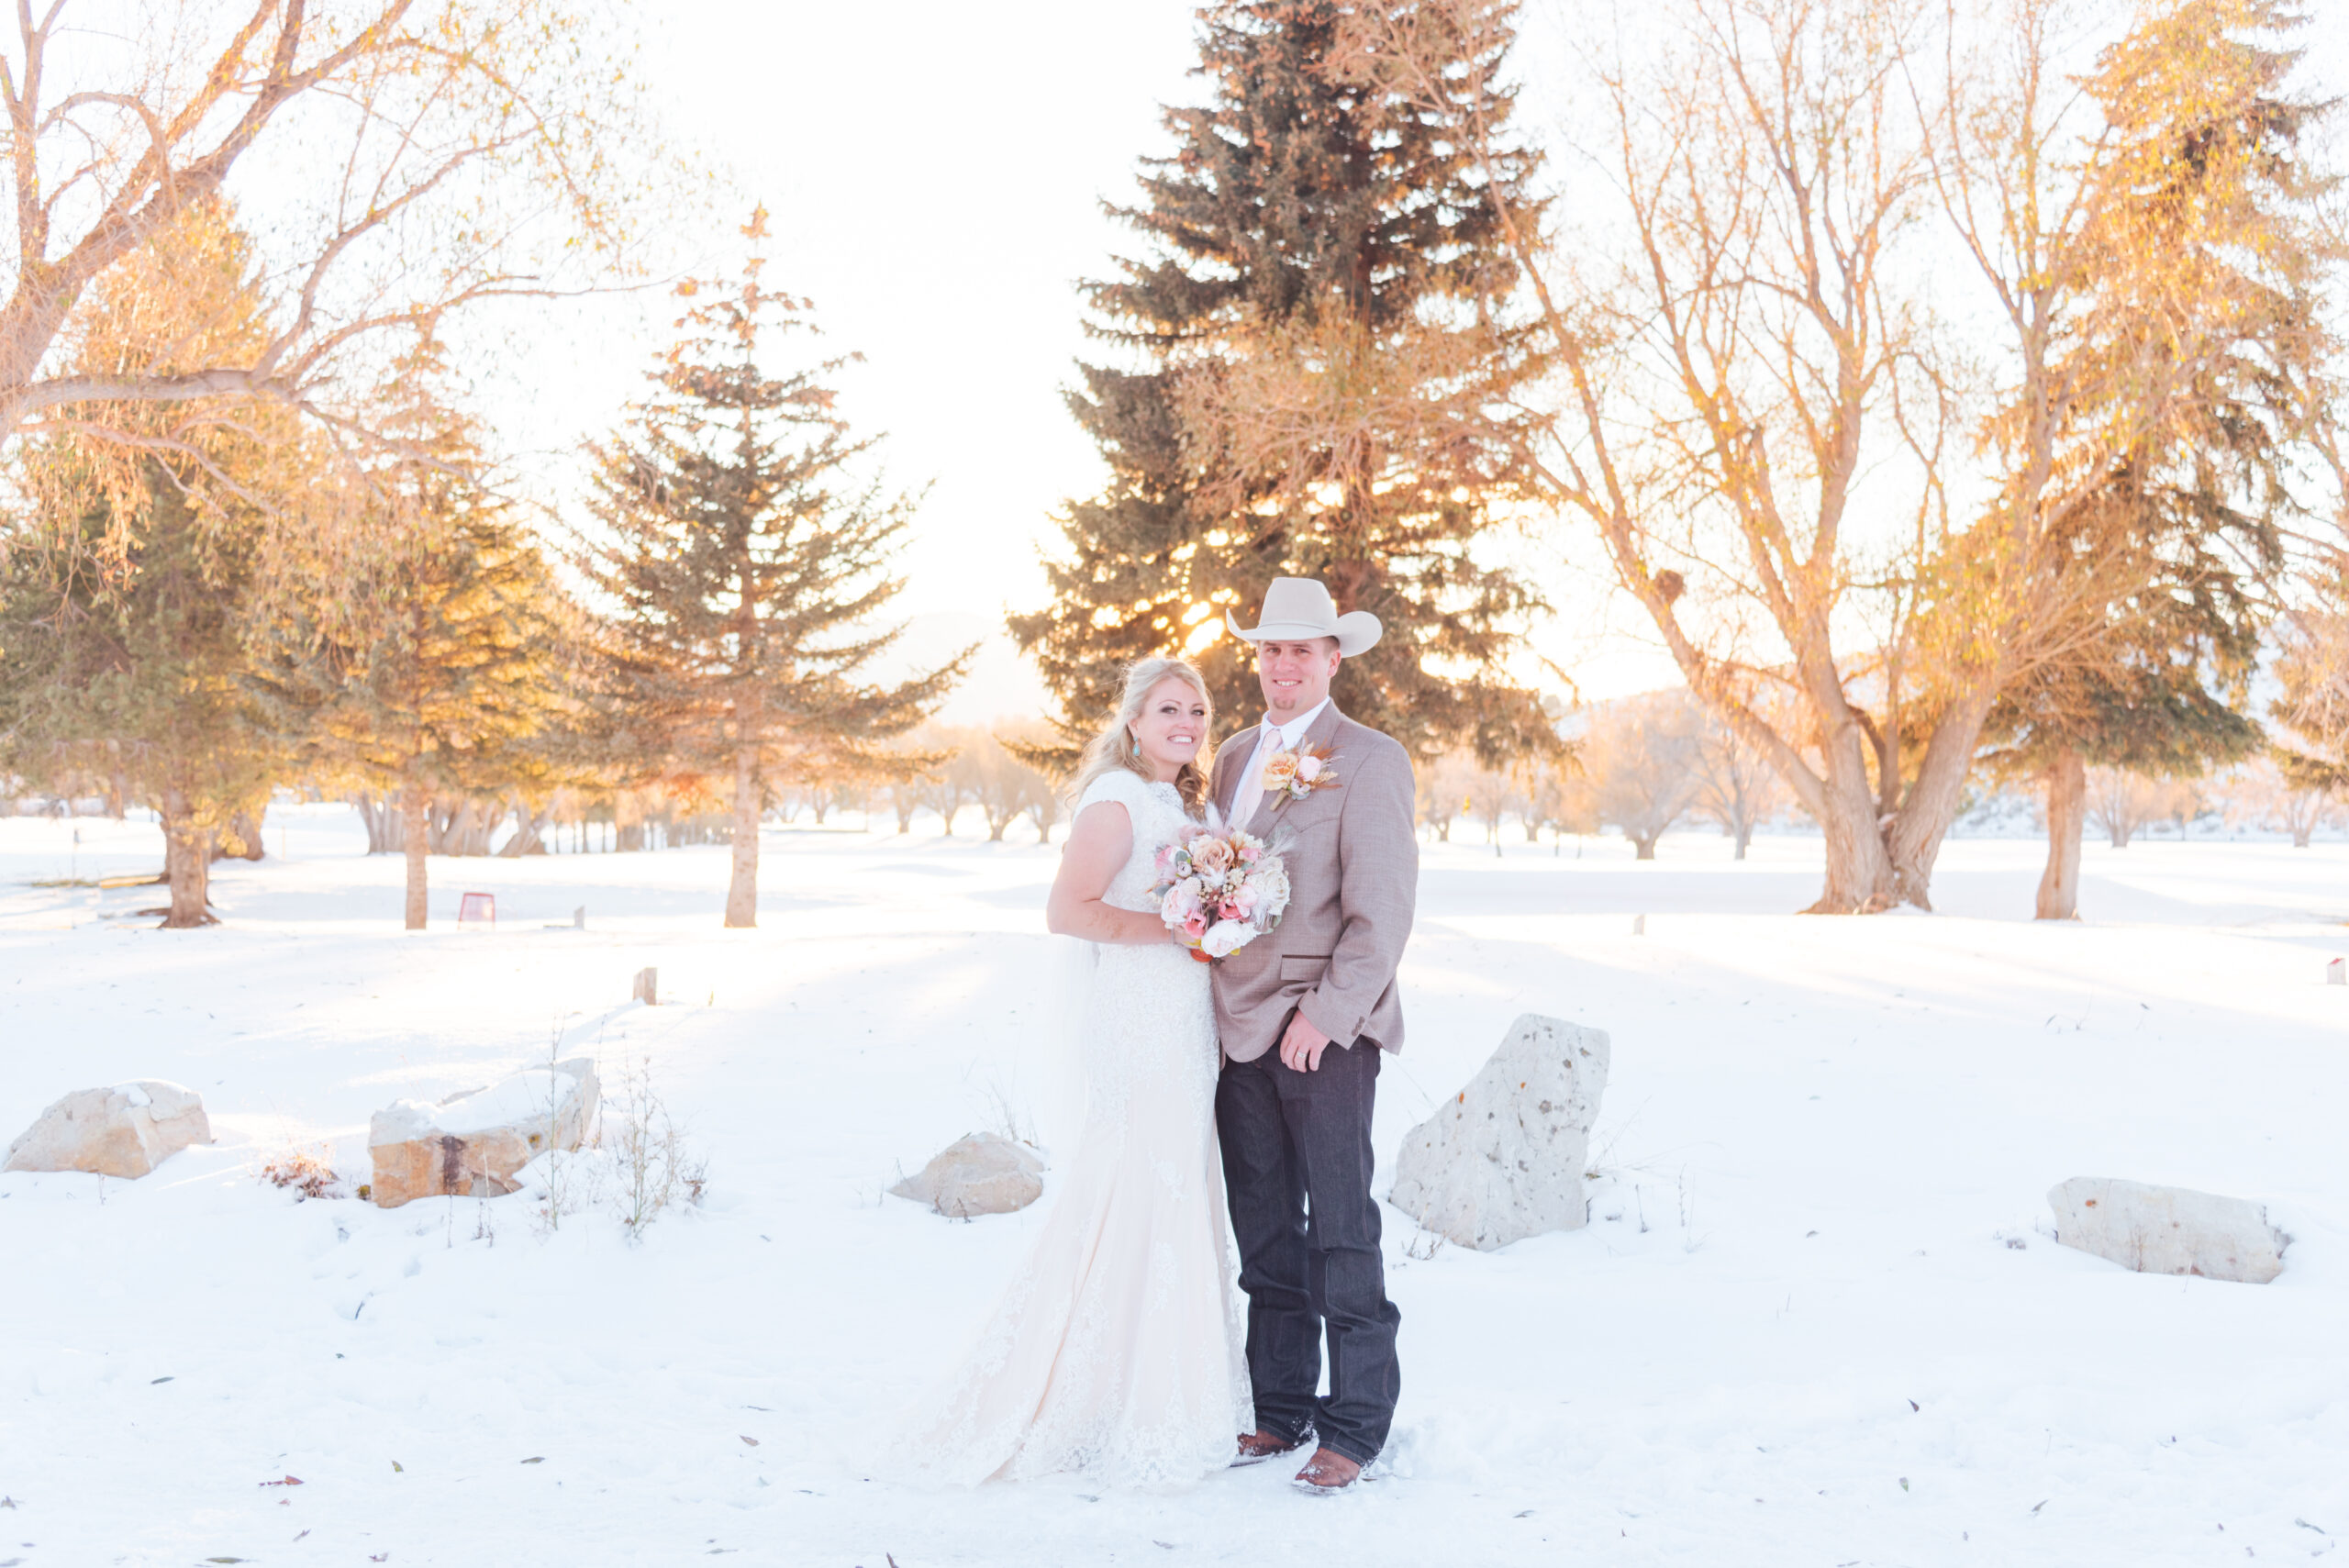 TY + LINSDAY WINTER WEDDING | COUPLES